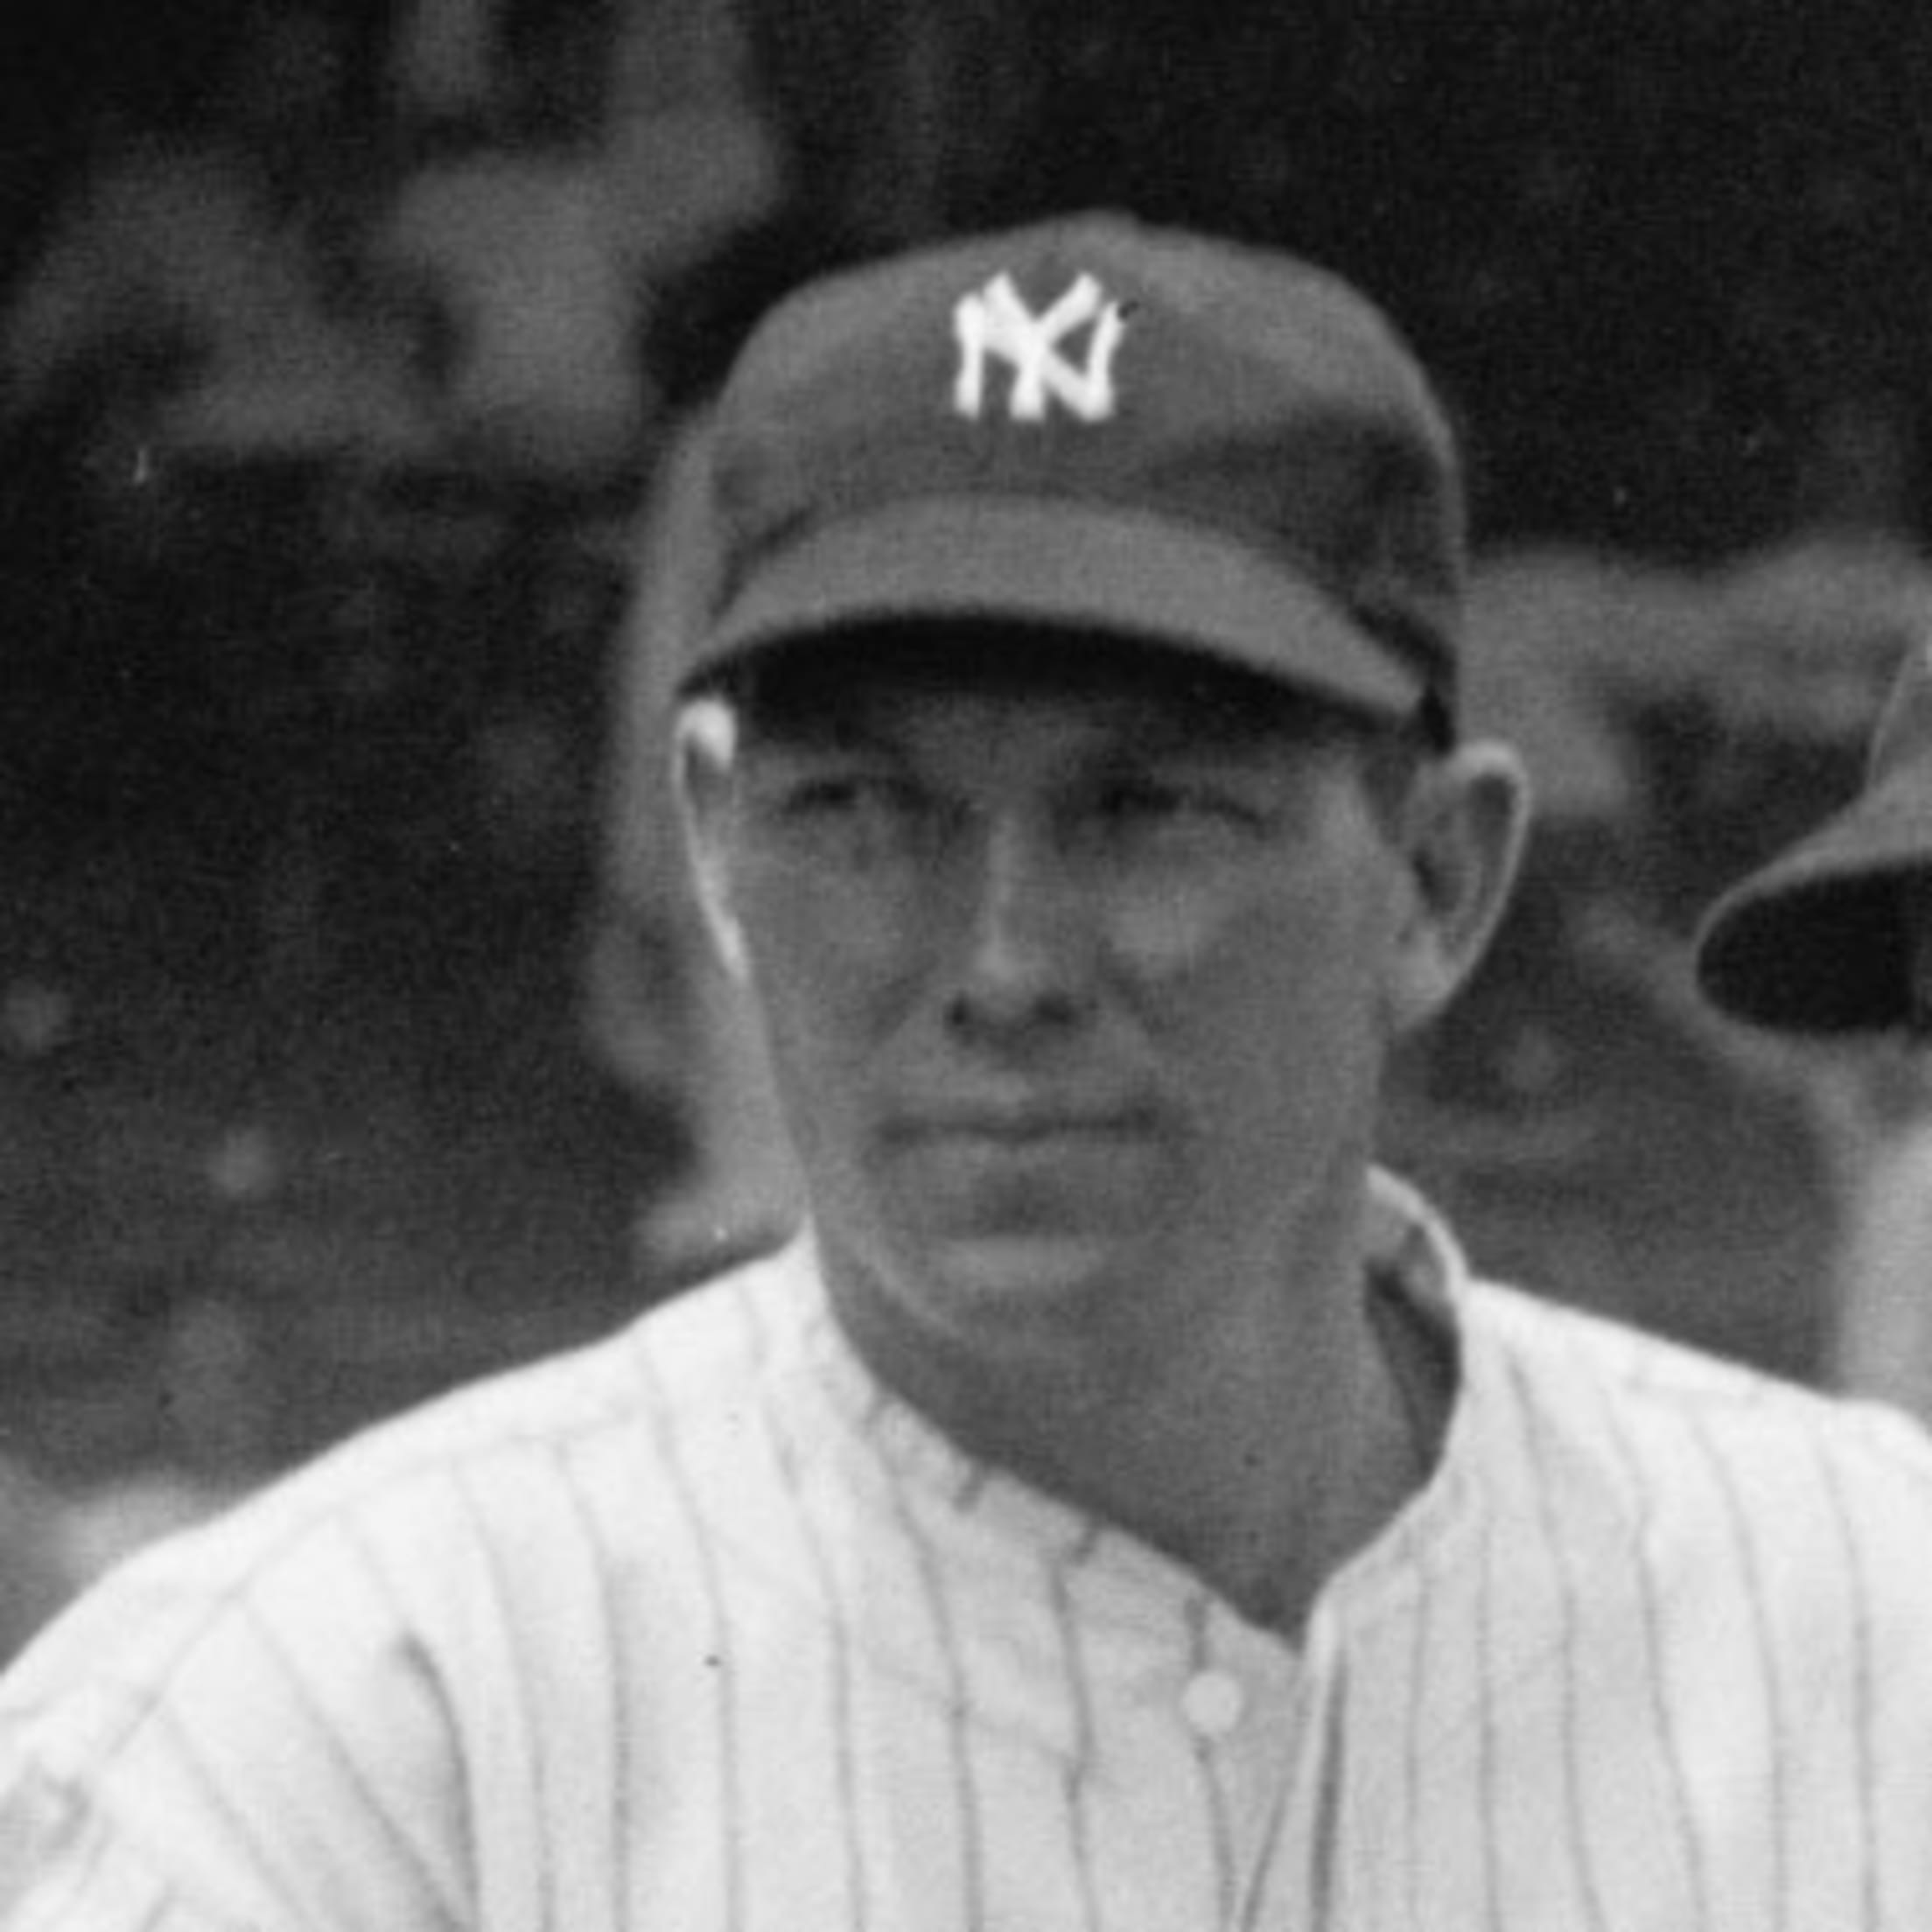 New York Yankees Retired Numbers Study: By WAR - Infogram